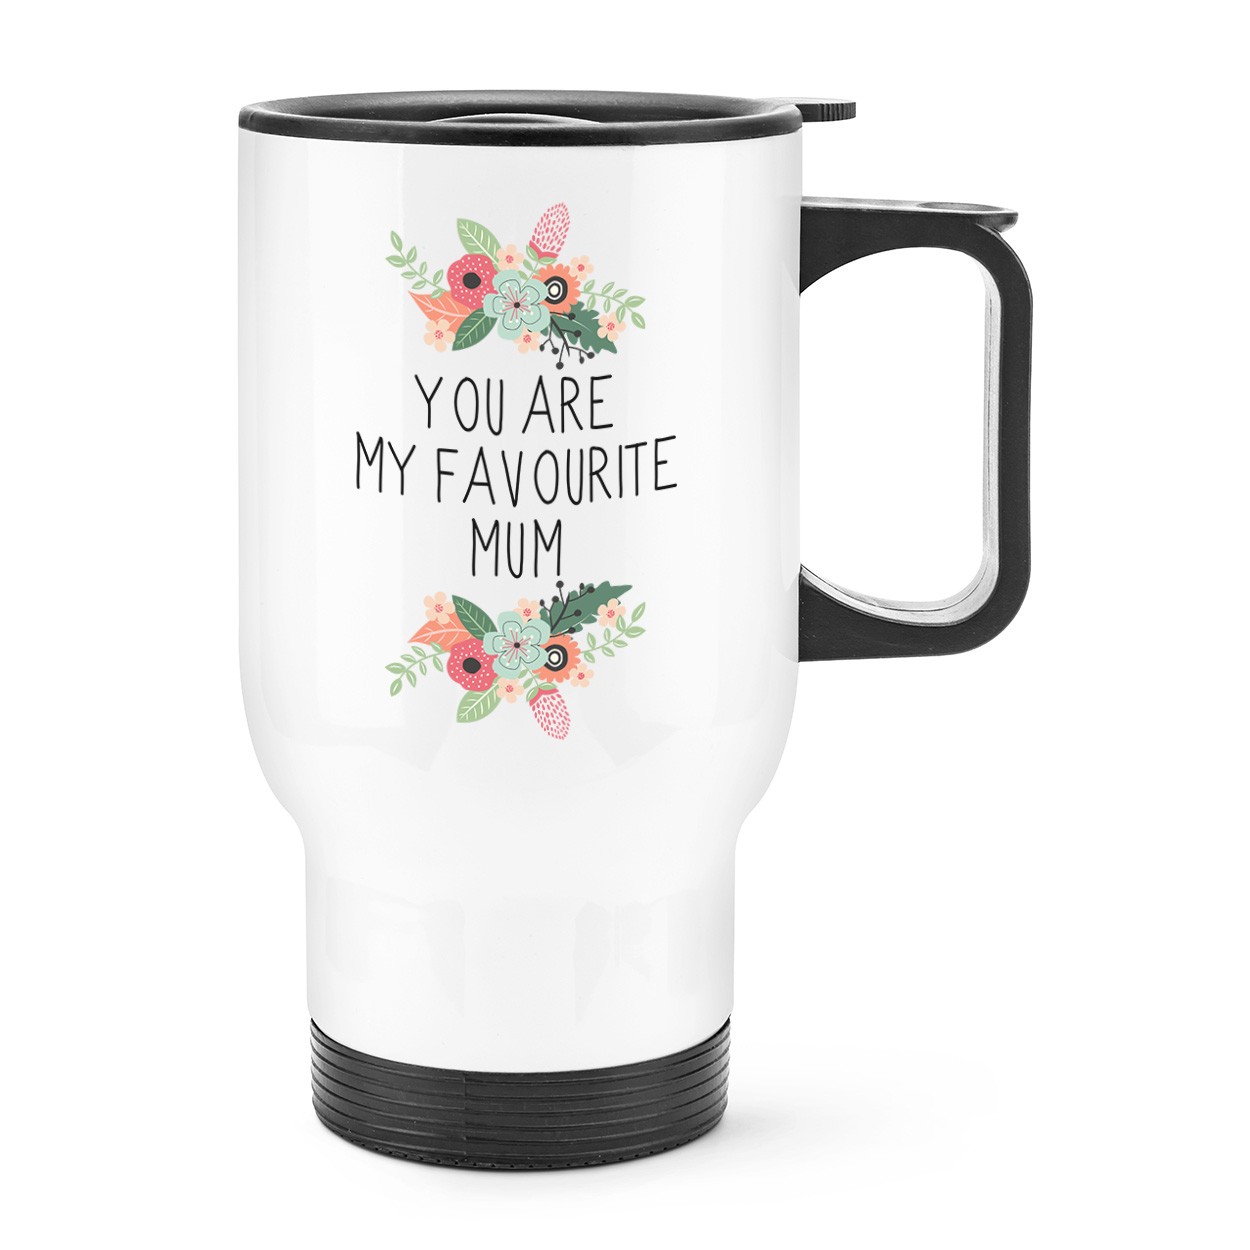 You Are My Favourite Mum Travel Mug Cup With Handle